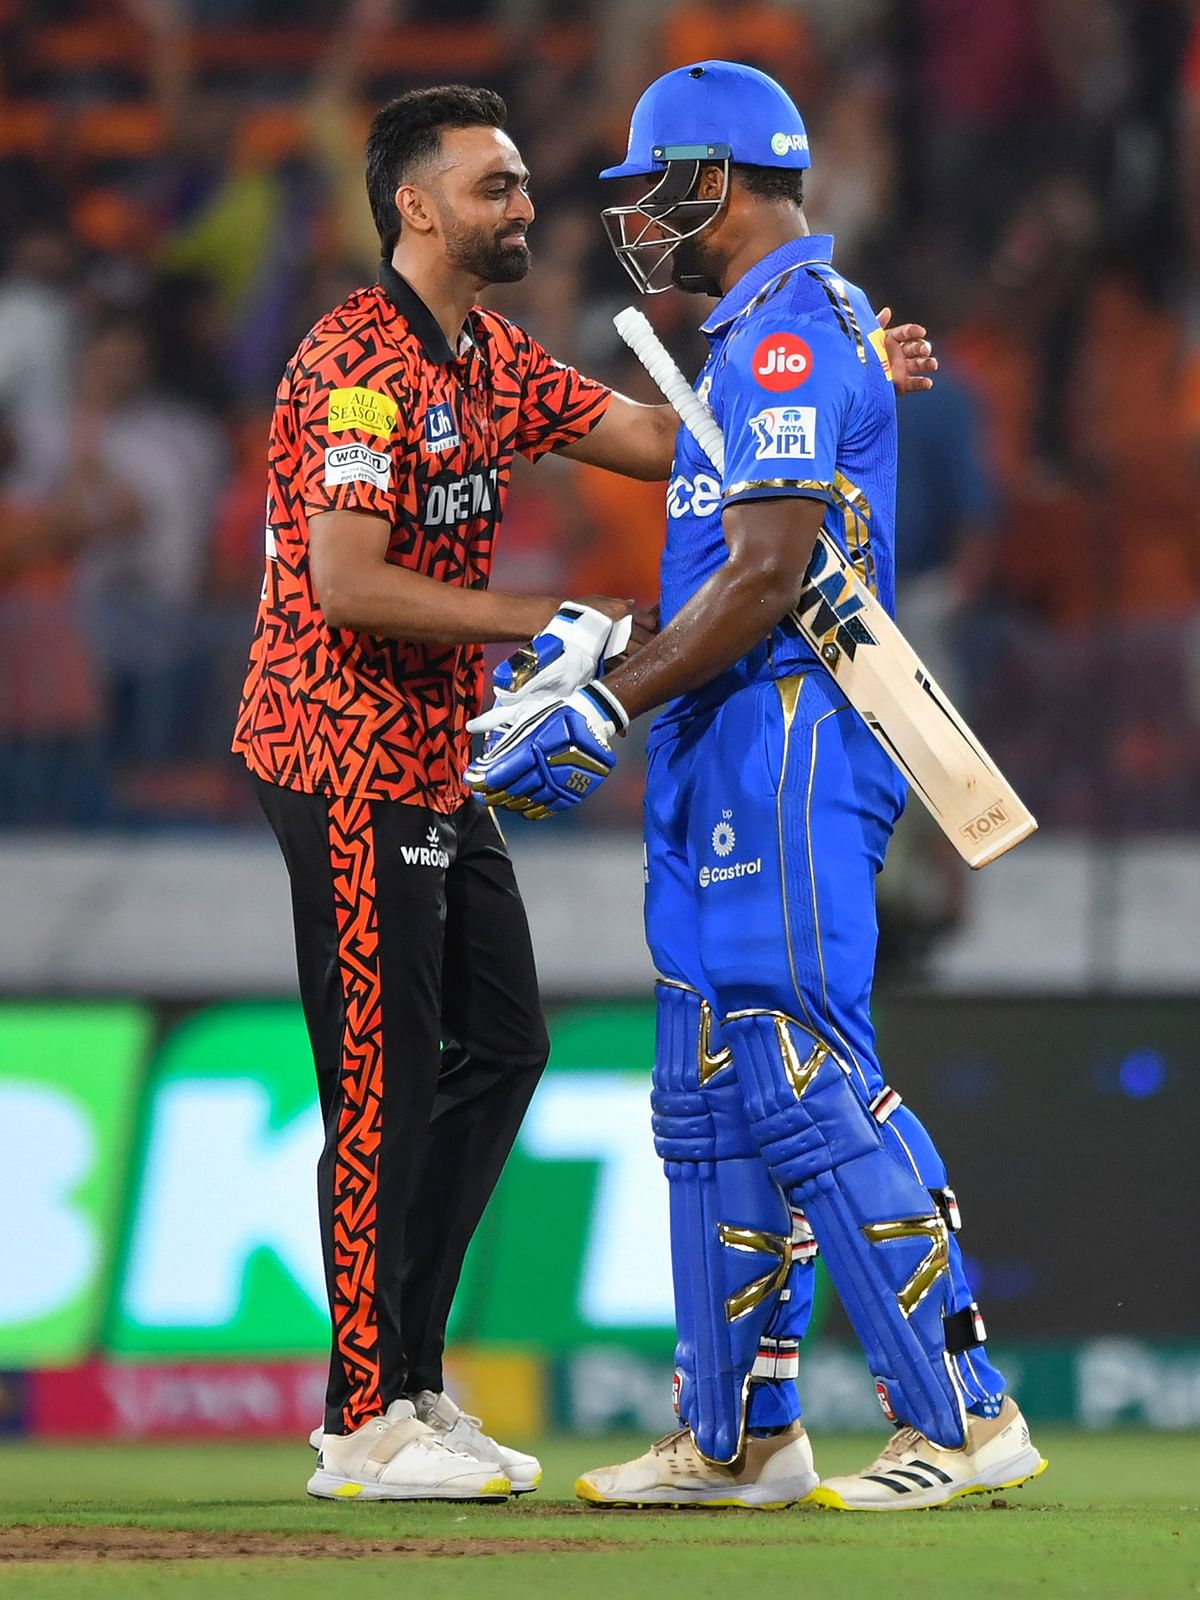 SRH's Jaydev Unadkat managed to build pressure on MI batsmen and restricted their scoring opportunities. He picked two wickets and conceded 47 runs in this high scoring match.